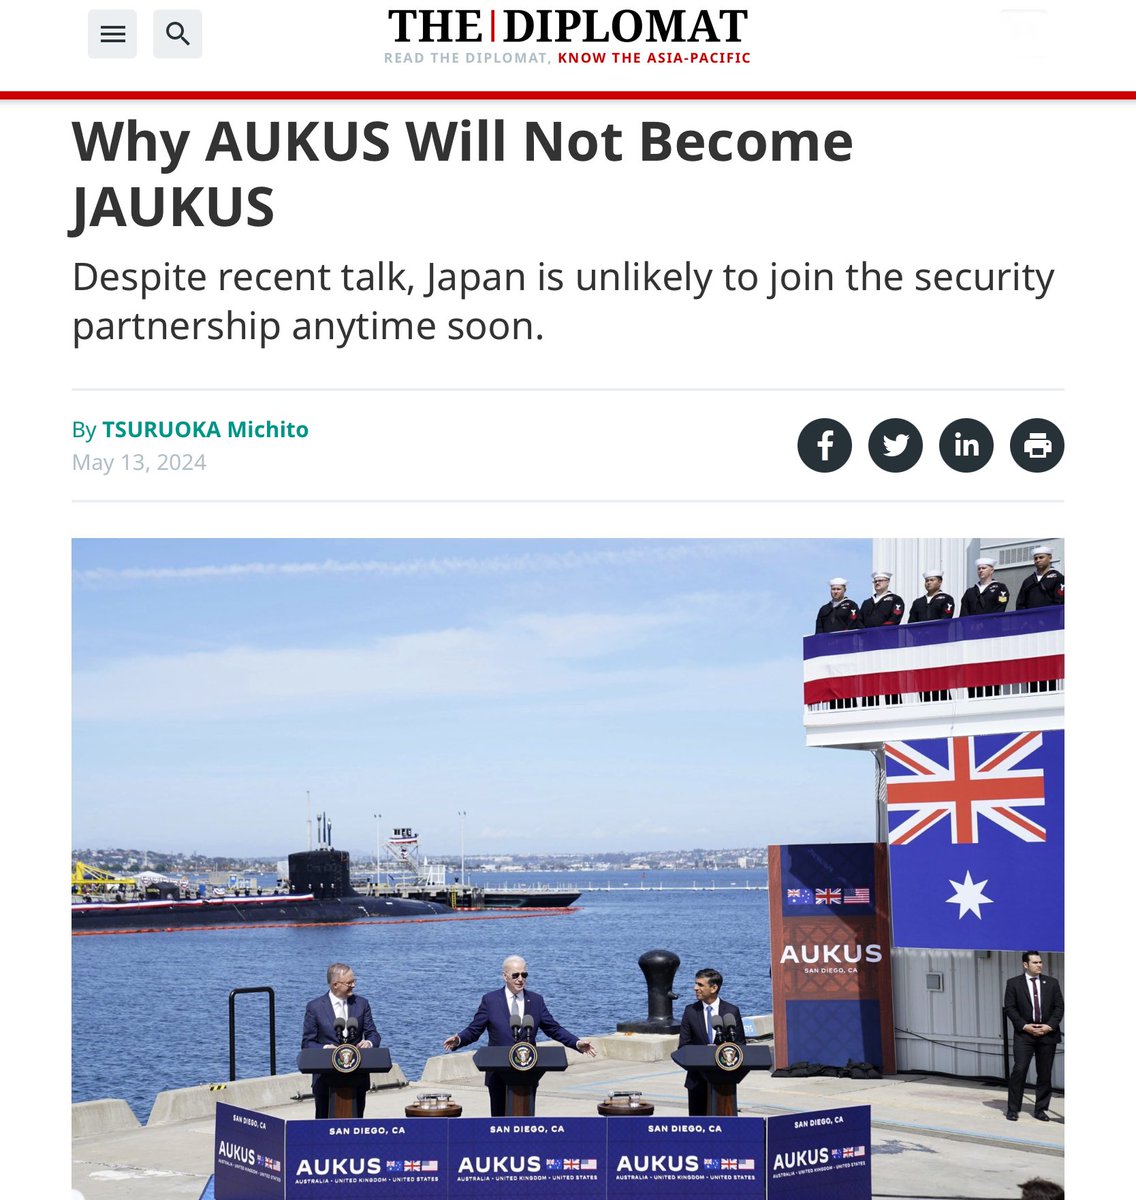 My two cents on AUKUS-Japan cooperation - a bit sceptical, but we need sobering debates, rather than cheap political talk about JAUKUS.
少し出遅れましたが4月の日米首脳会談を受けたAUKUSと日本との協力に関する、若干慎重な見方をThe Diplomatに寄稿。
thediplomat.com/2024/05/why-au…